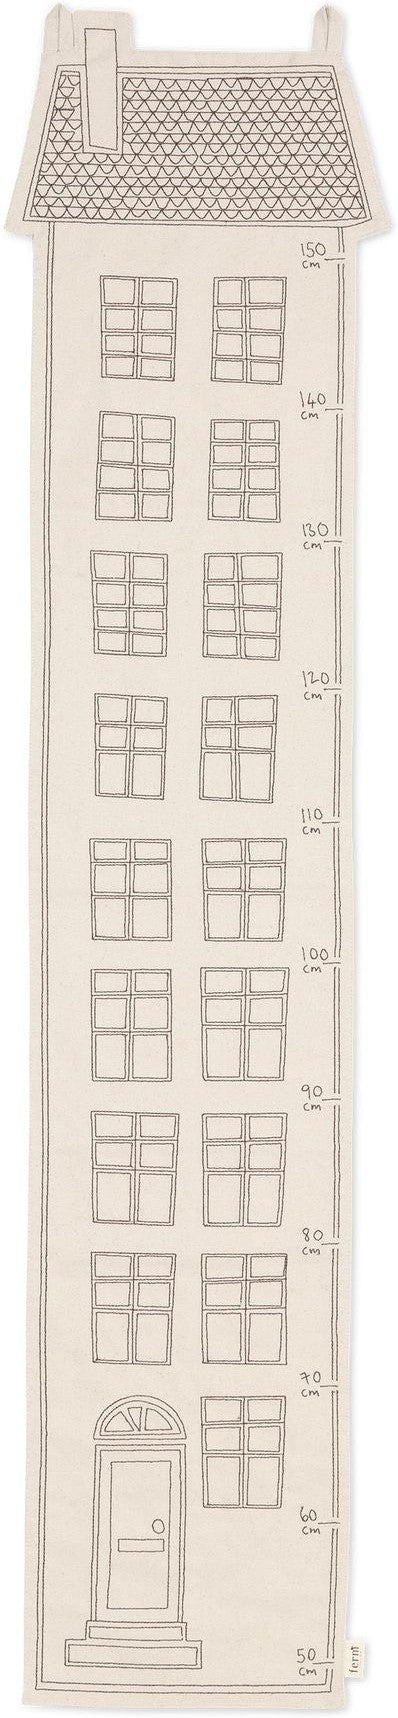 Ferm Living Abode Growth Chart, Undyed Off White